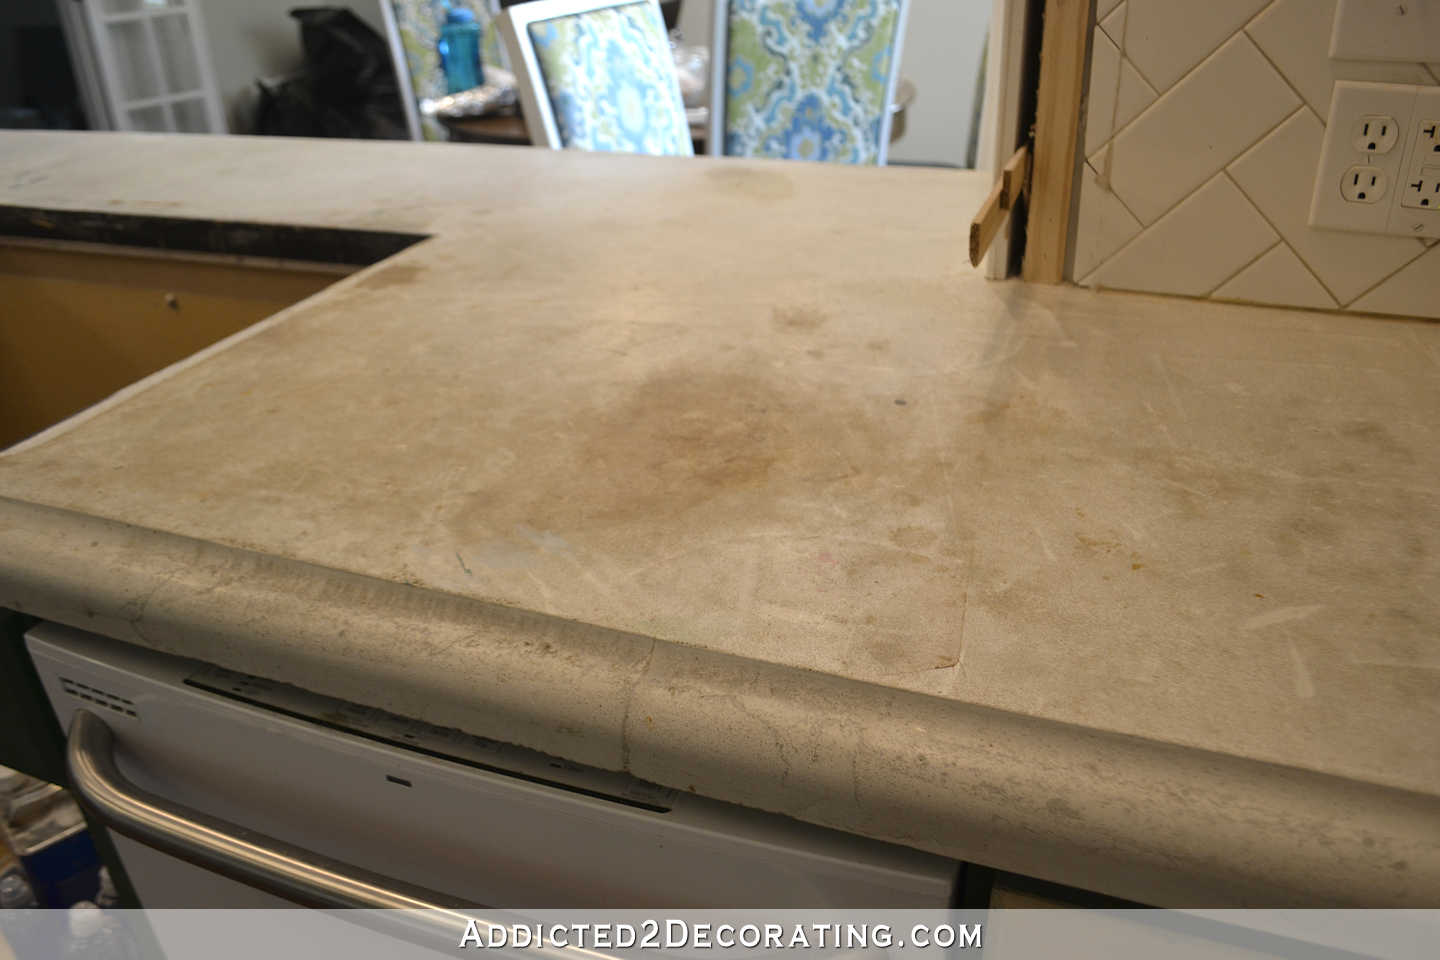 refinishing concrete countertops - 1 - concrete countertops before refinishing - stains on peninsula by sink area